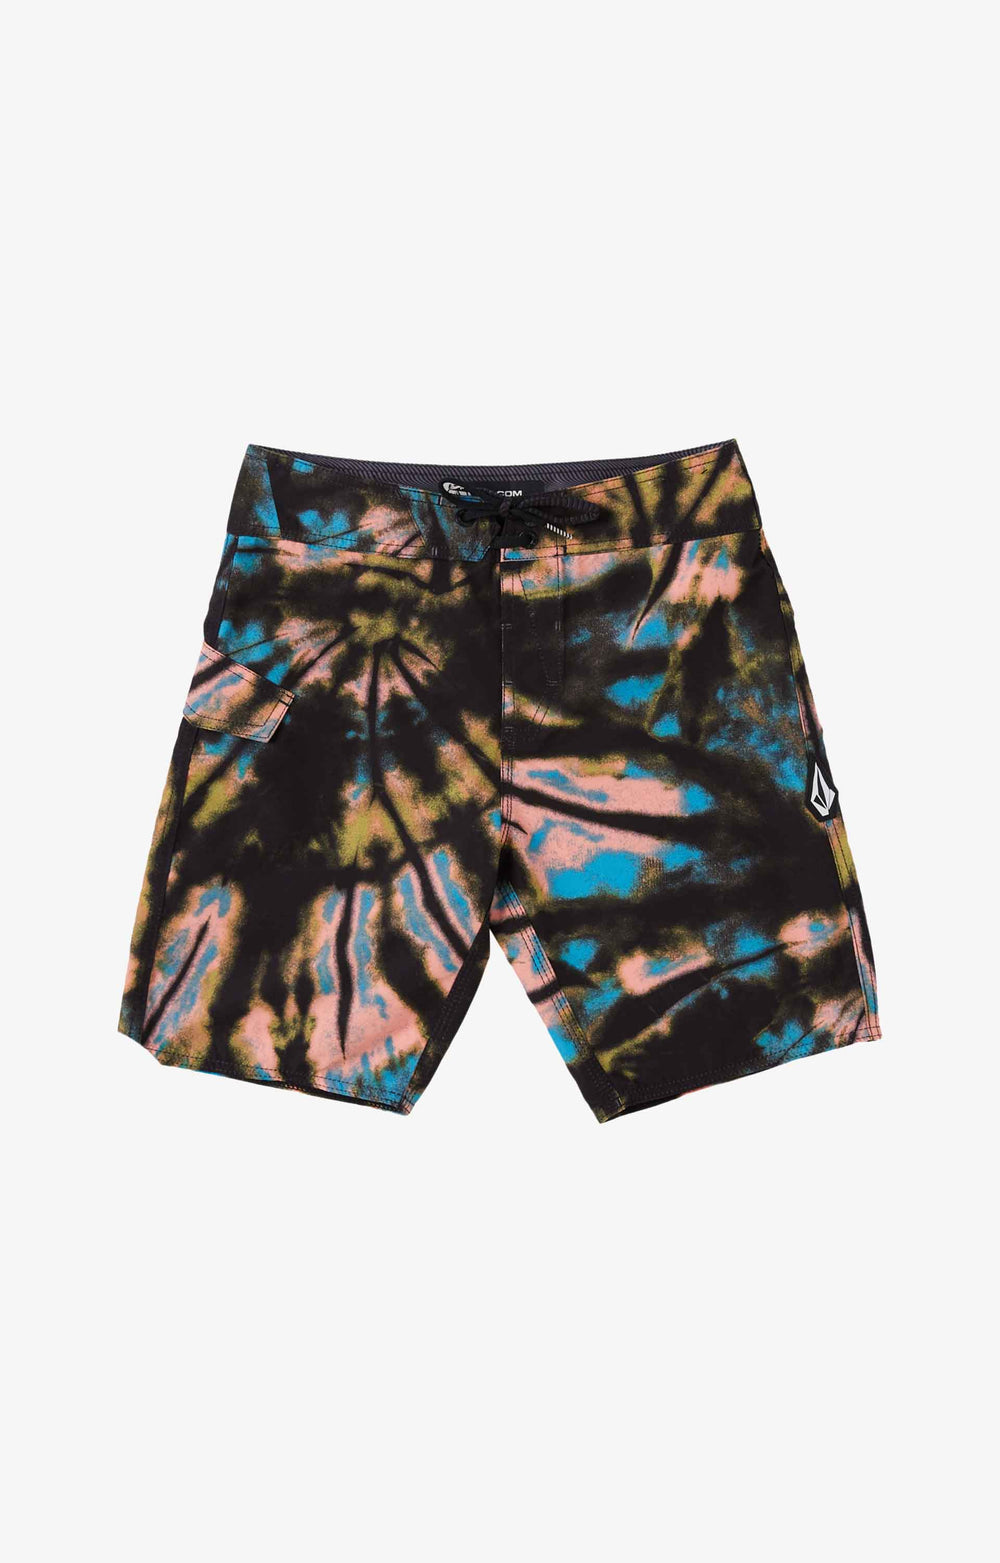 Volcom Mod Distraction Youth Shorts, Black